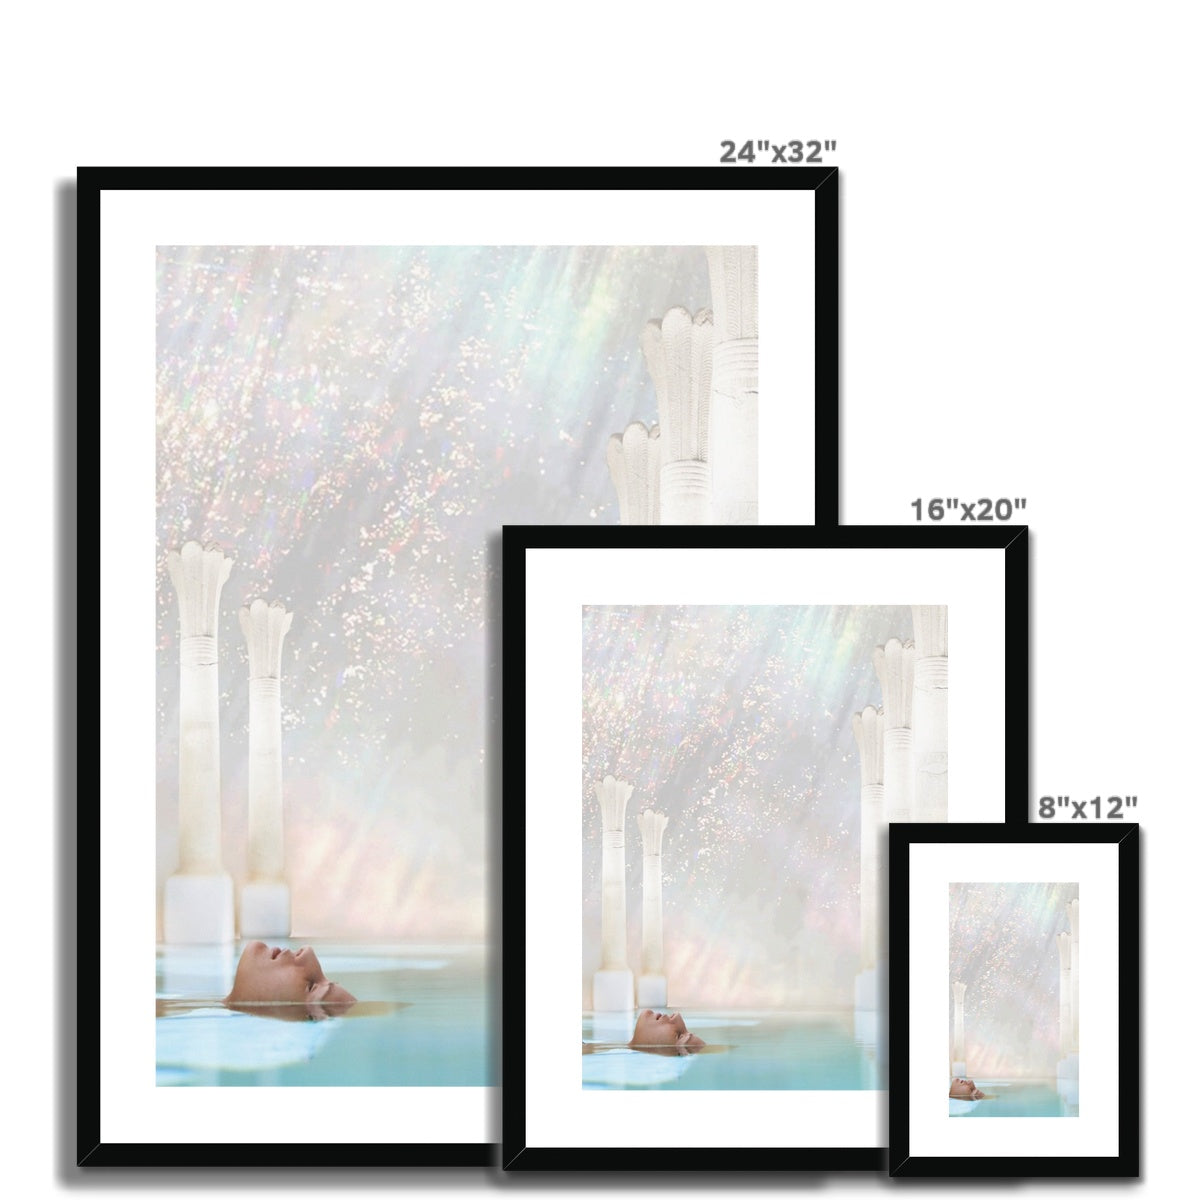 Akashic Waters Framed & Mounted Print - Starseed Designs Inc.